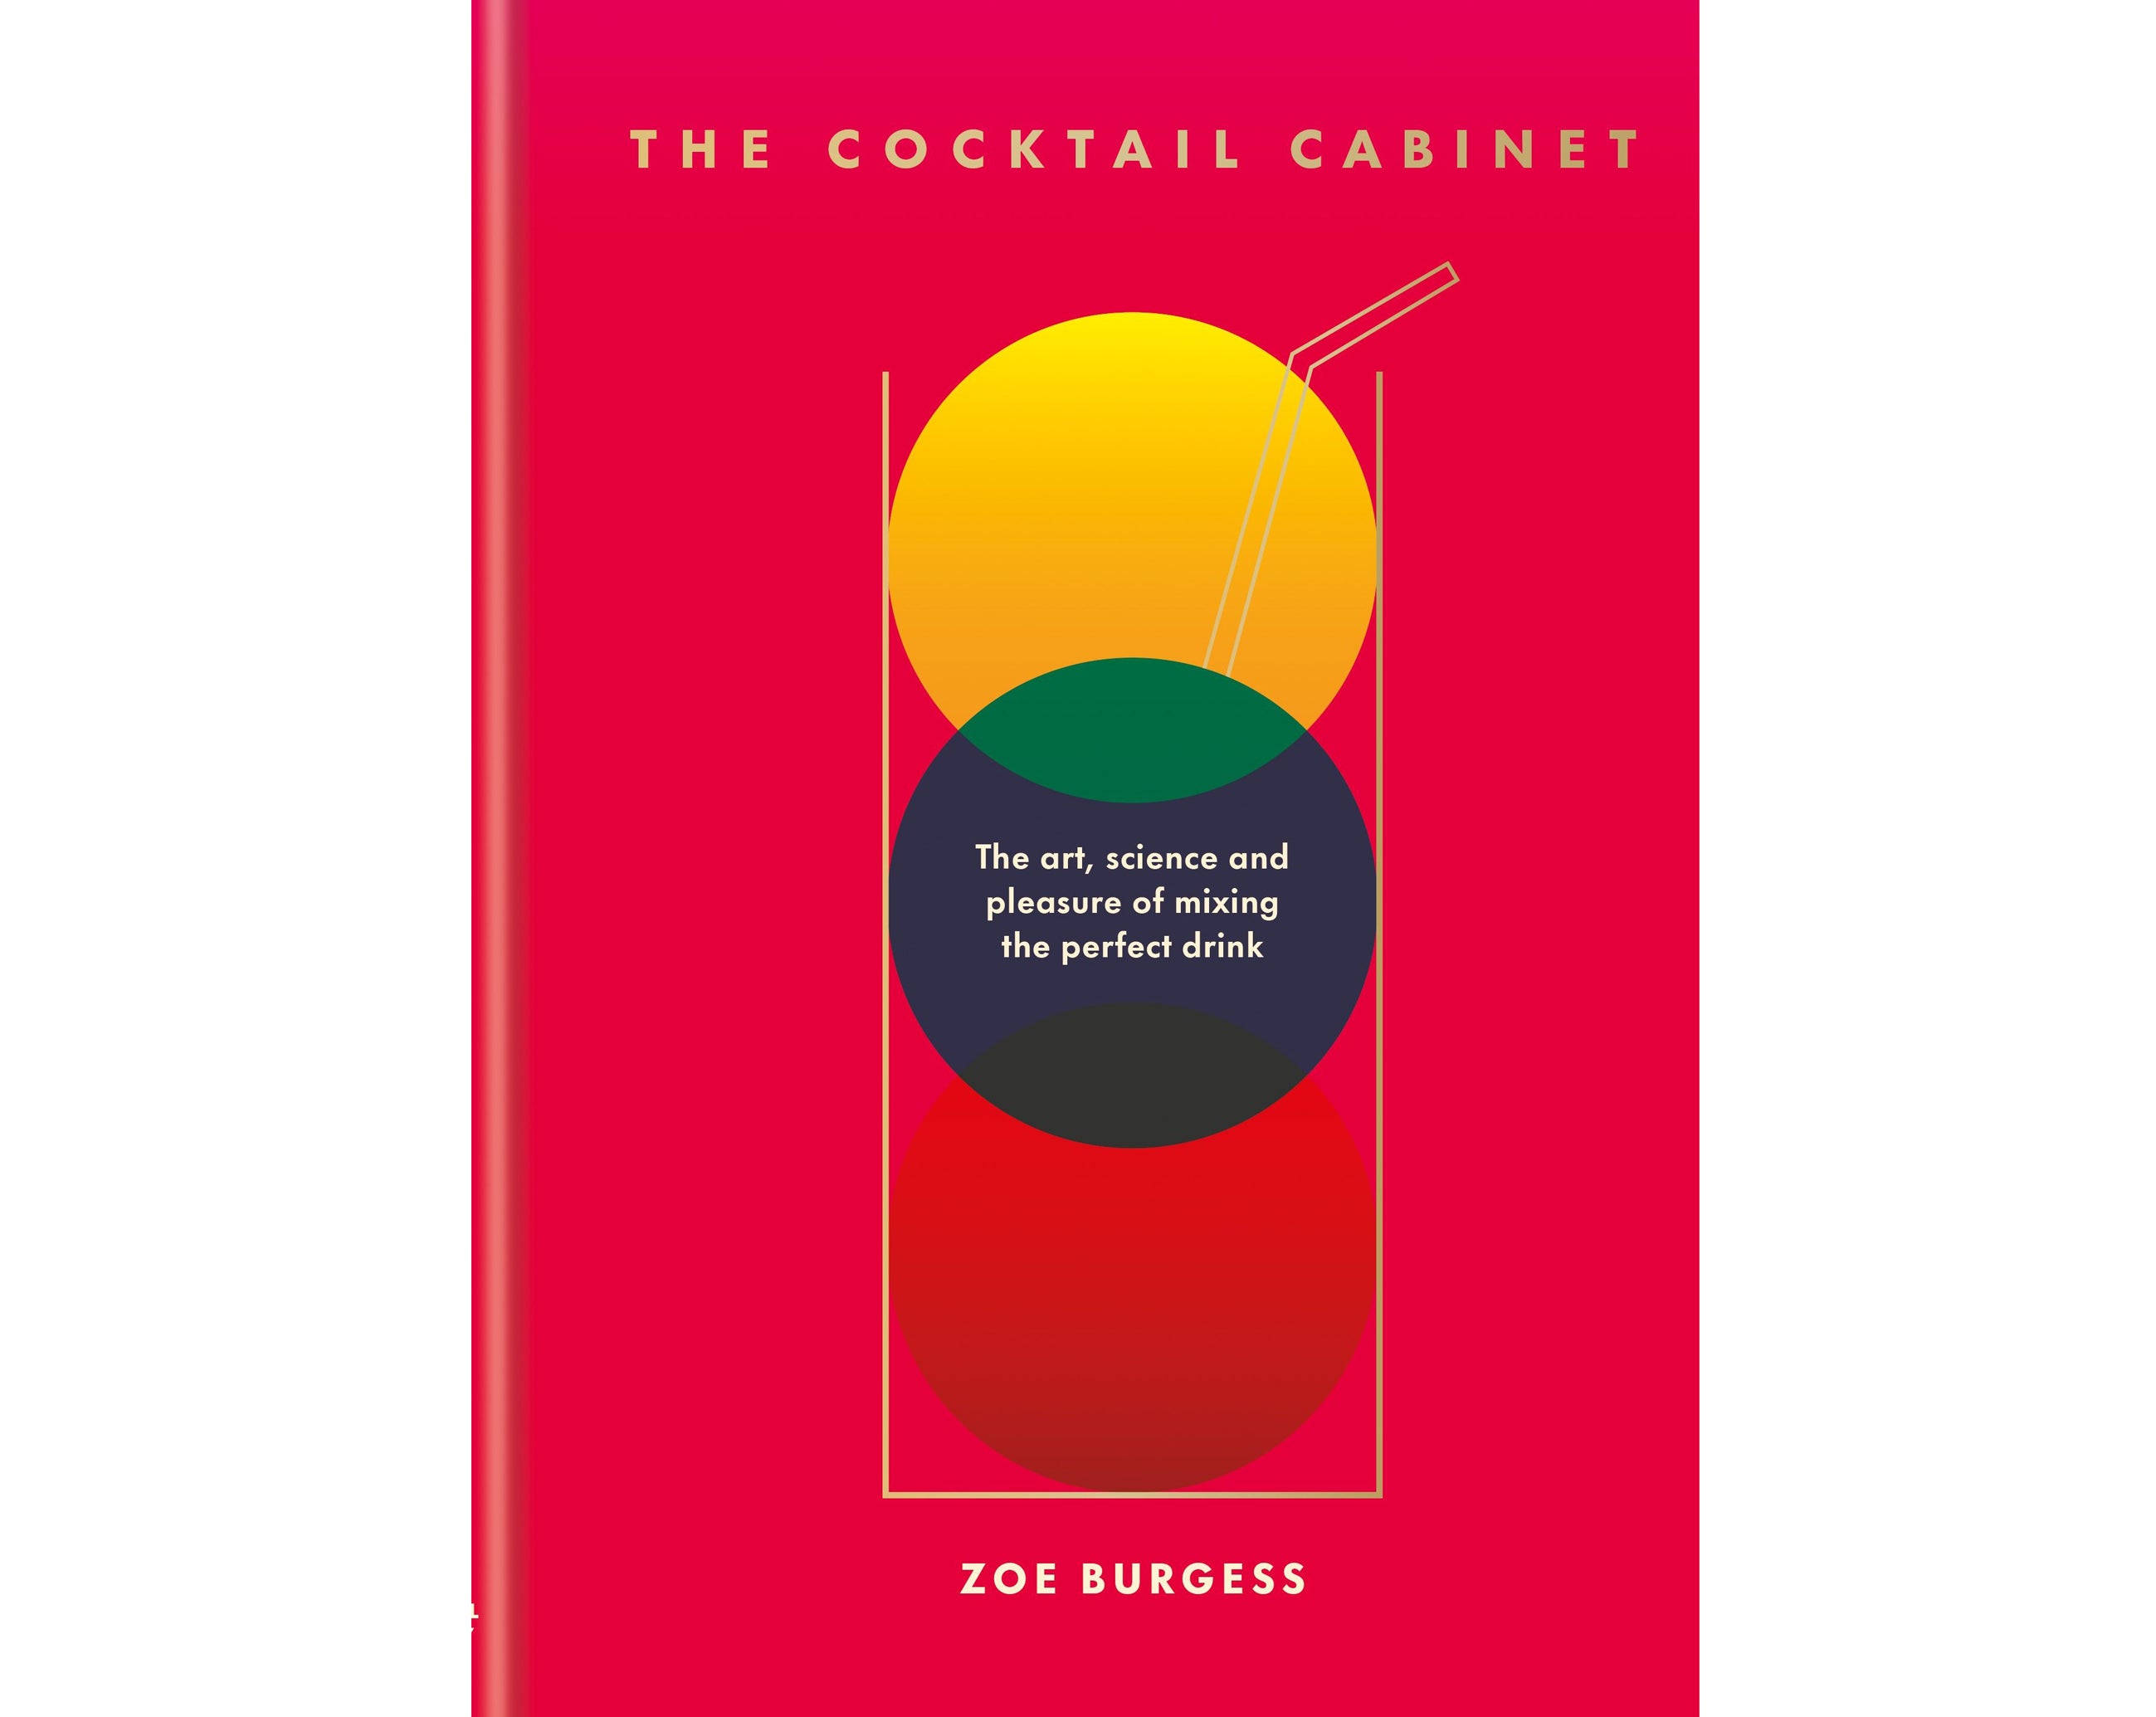 Burgess’ new book promises to develop your approach to cocktail making